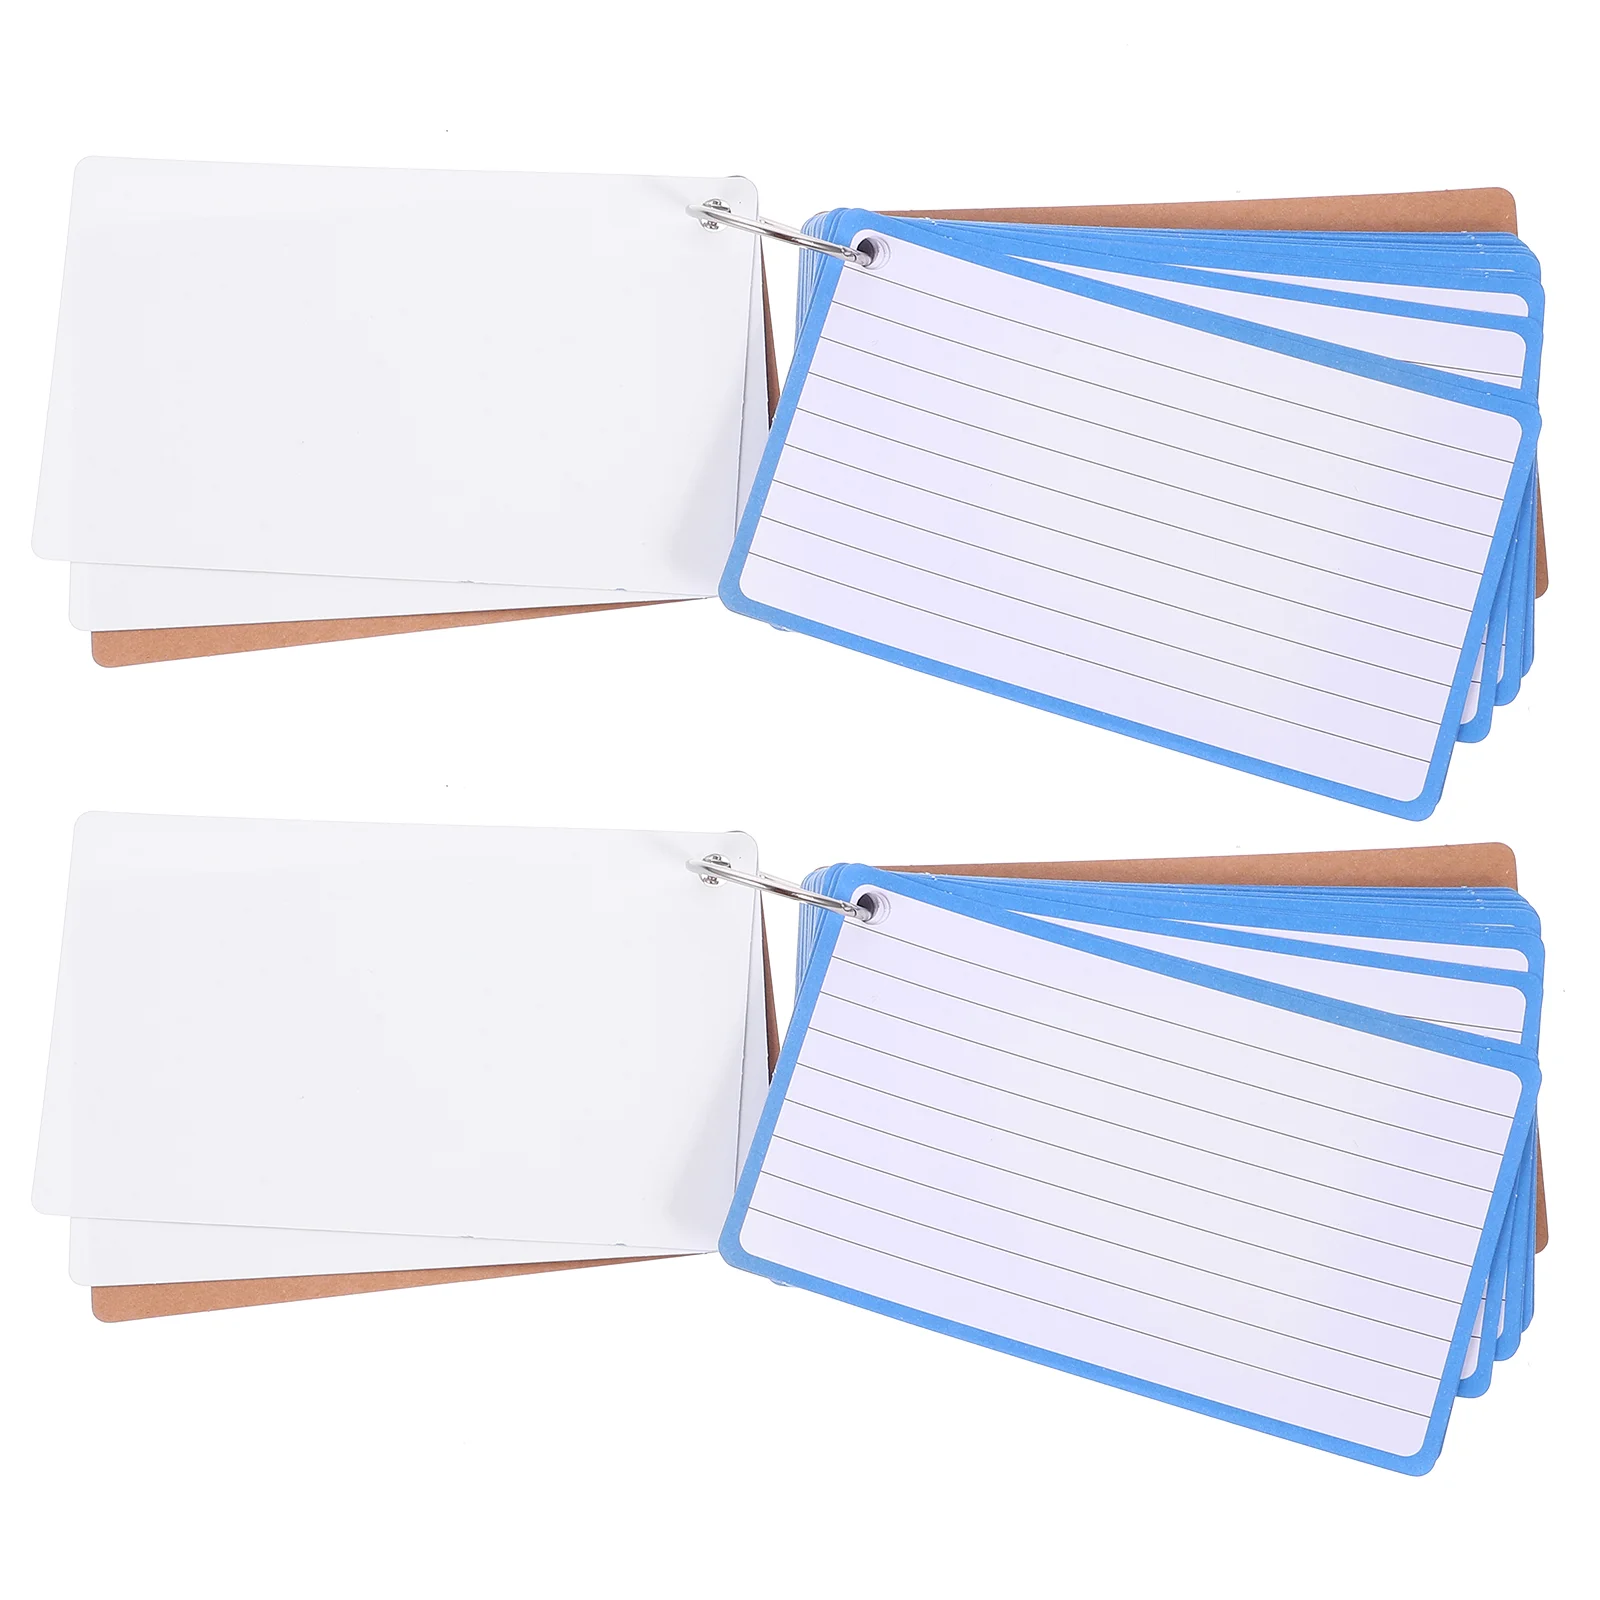 2 Books of Memo Blank Cards Index Cards Lined Cards Diy Graffiti Cards Colored Index Card 12 pcs watercolor paper greeting card multi function blank cards thickened postcard graffiti thank you note